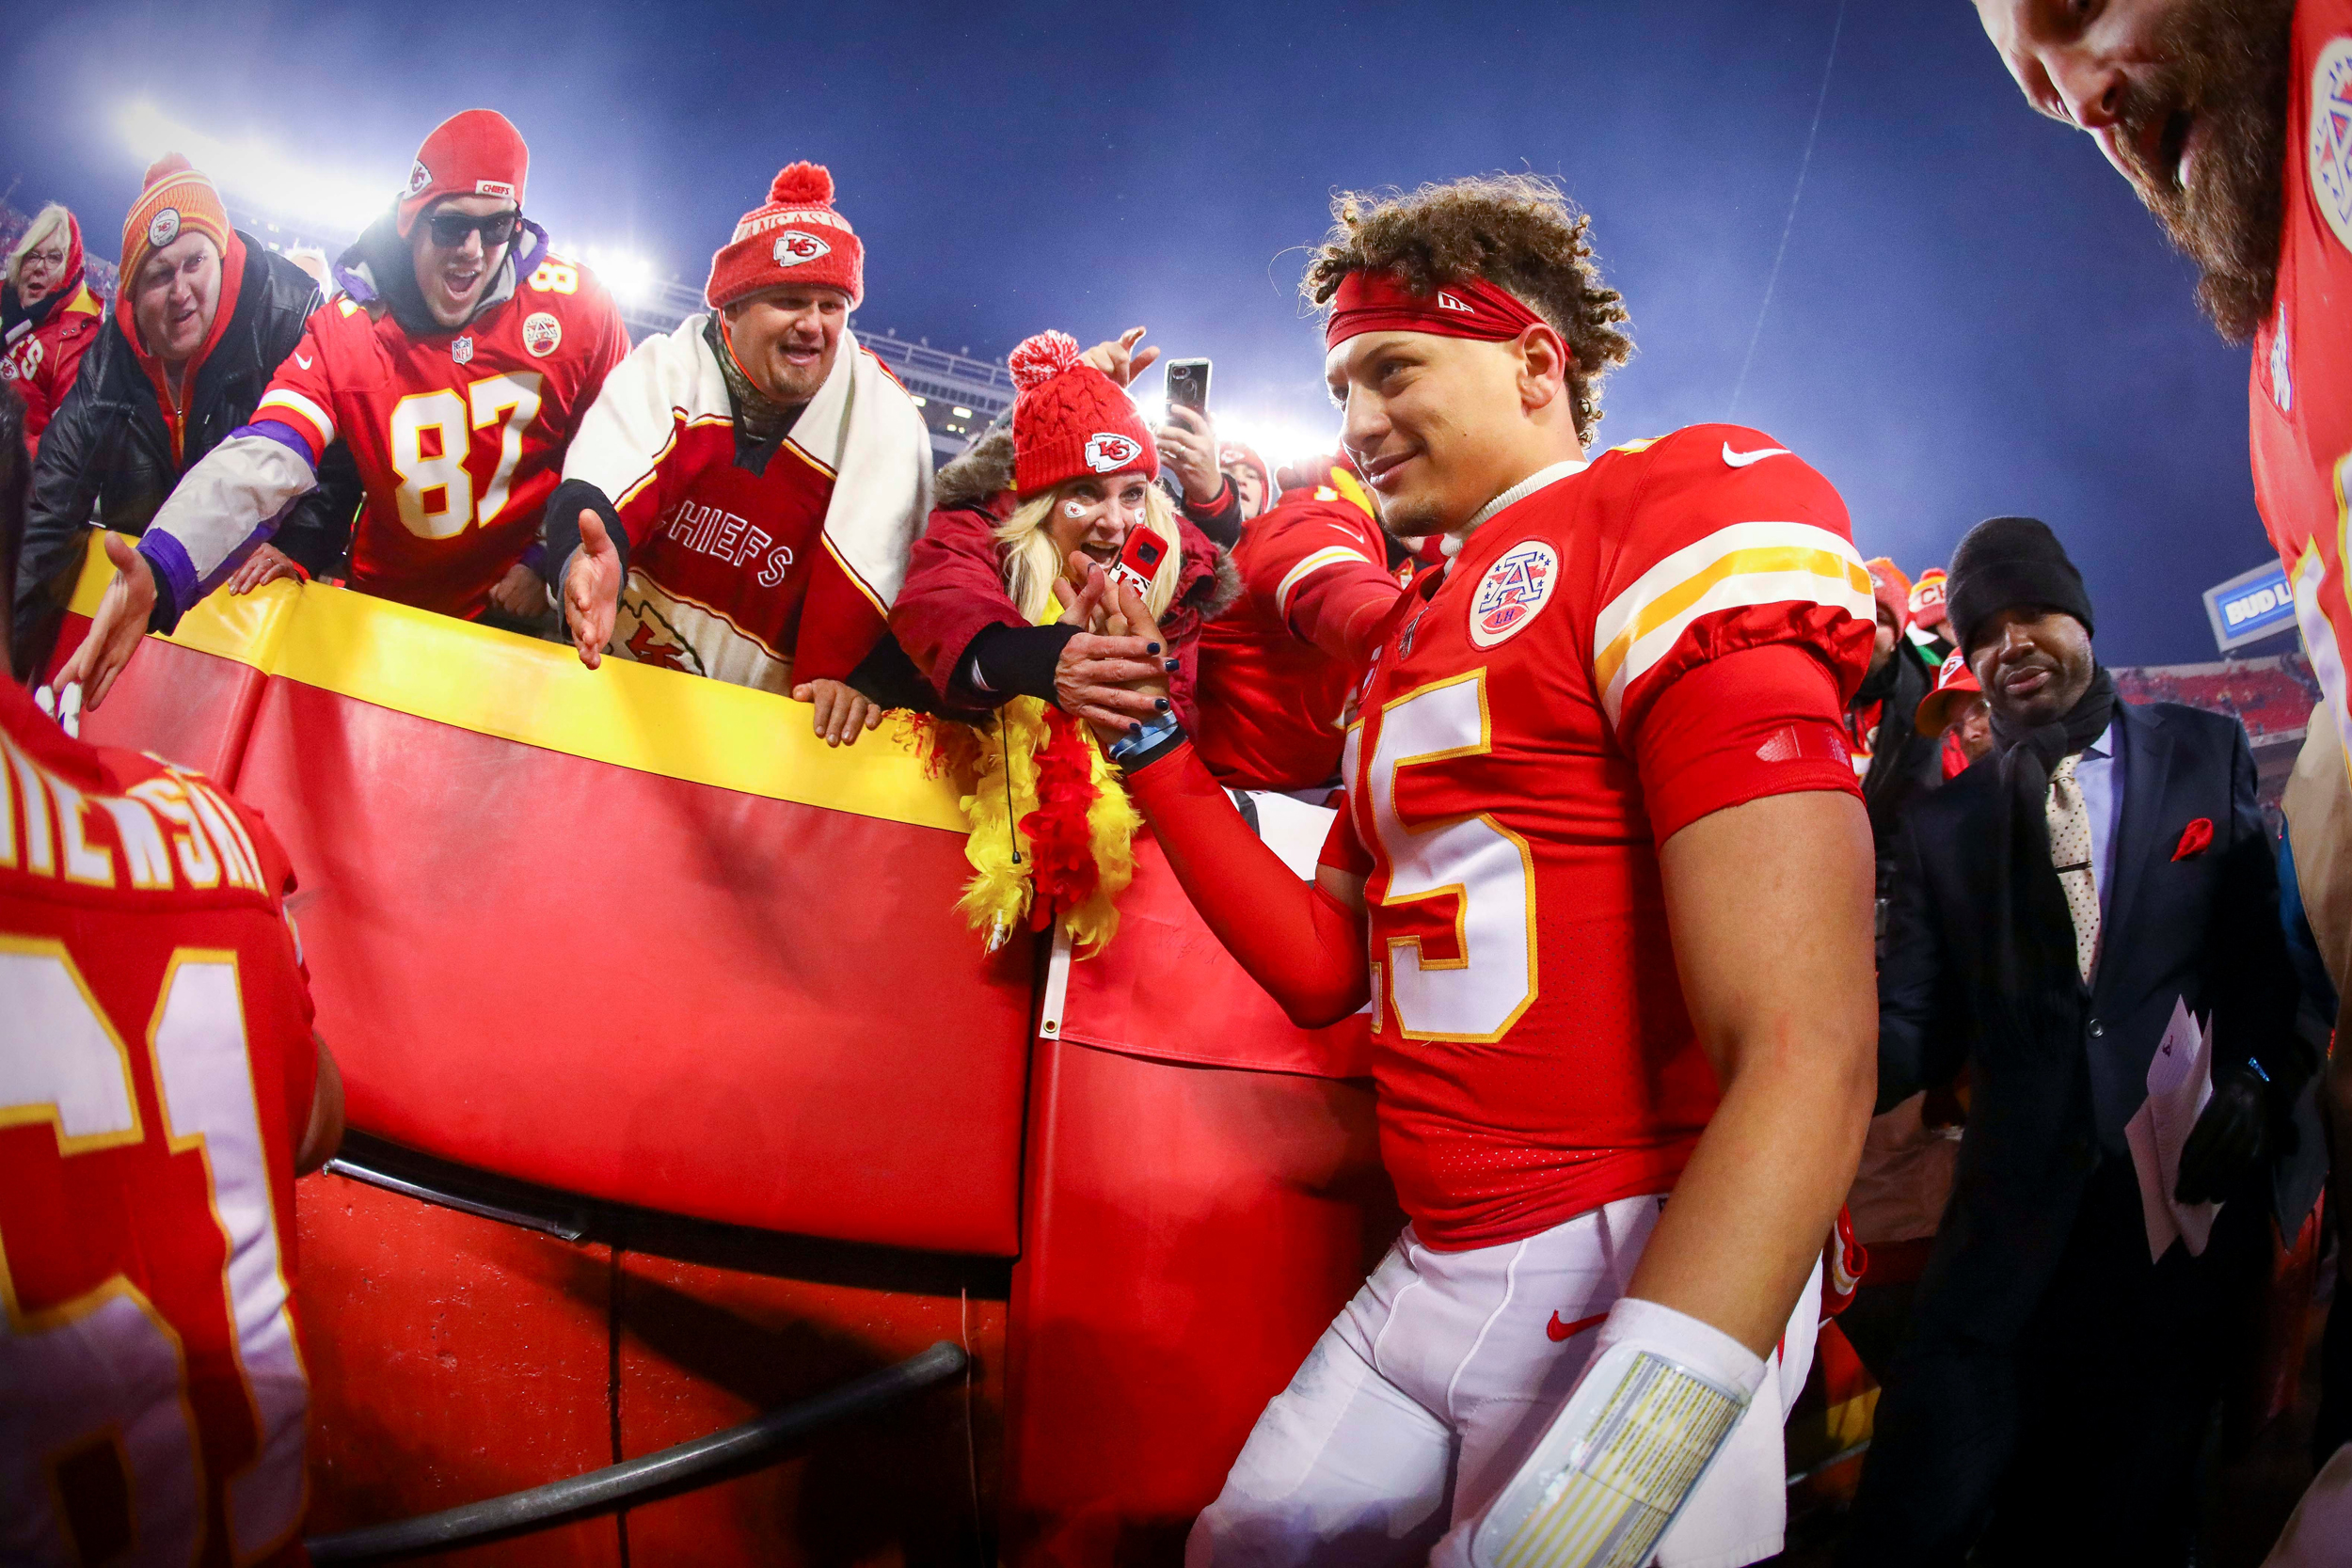 “This is definitely going to be a transition year"- Patrick Mahomes on the Chiefs' plans for this upcoming season